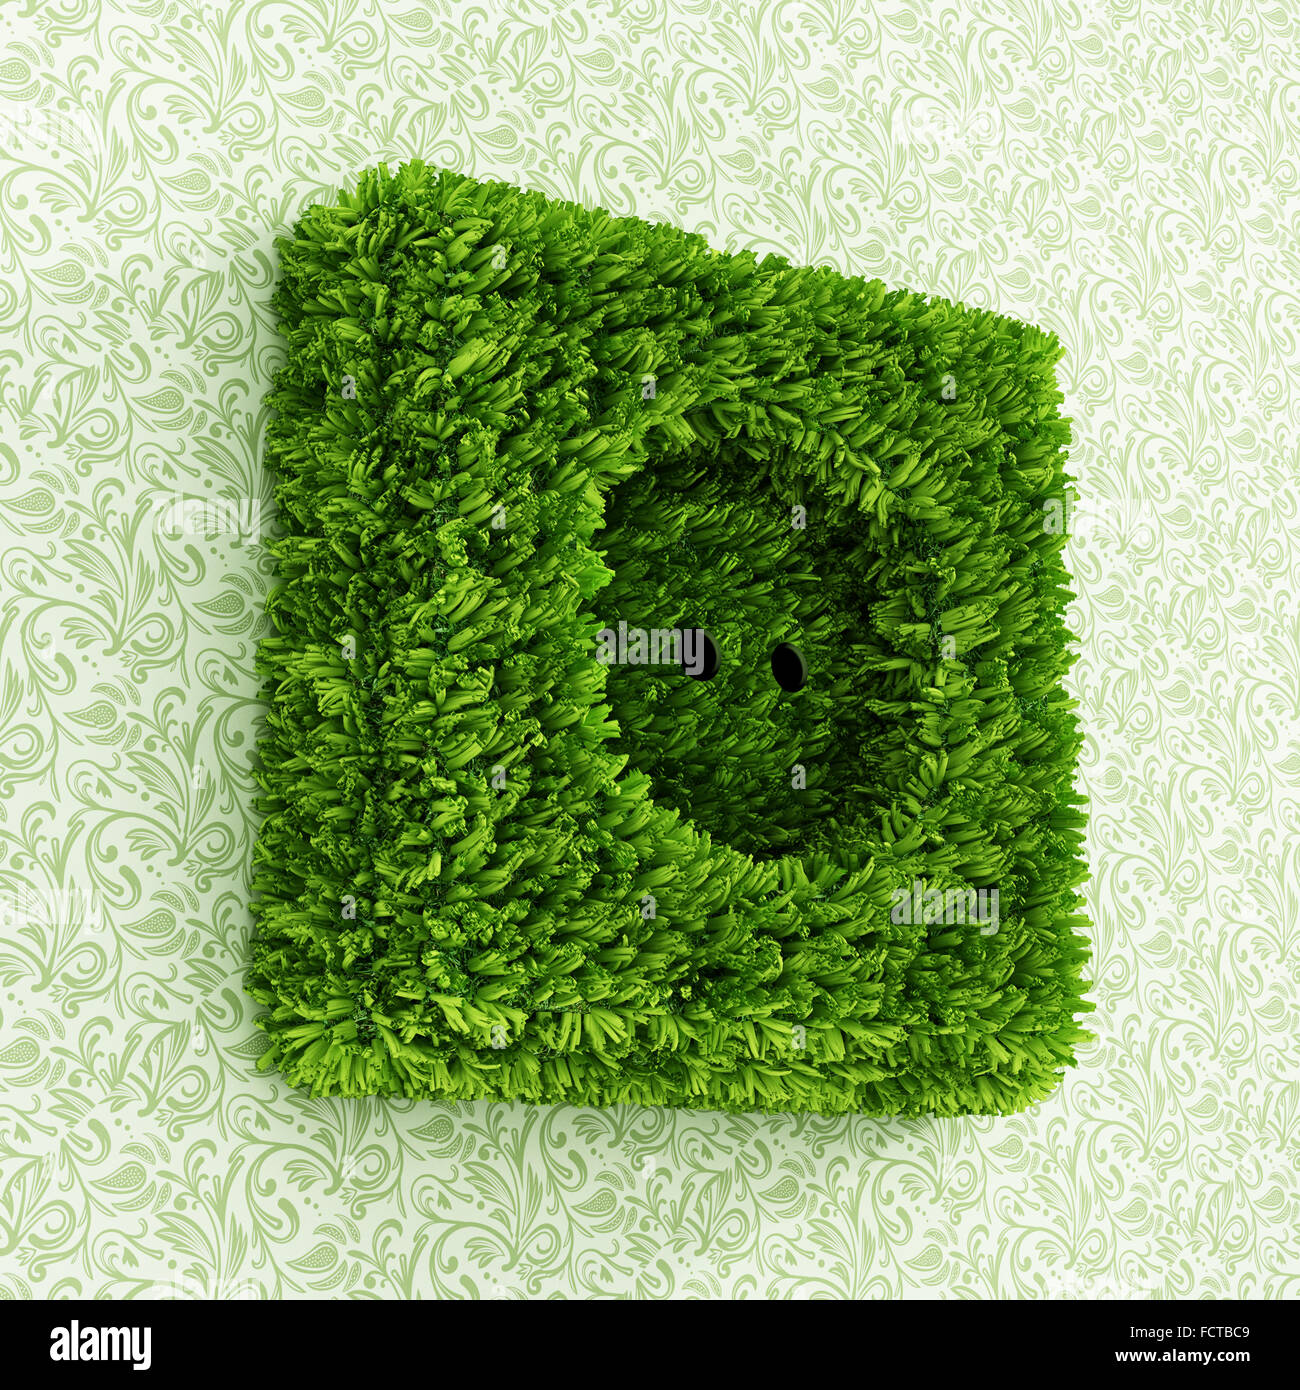 Power outlet covered with green grass Stock Photo